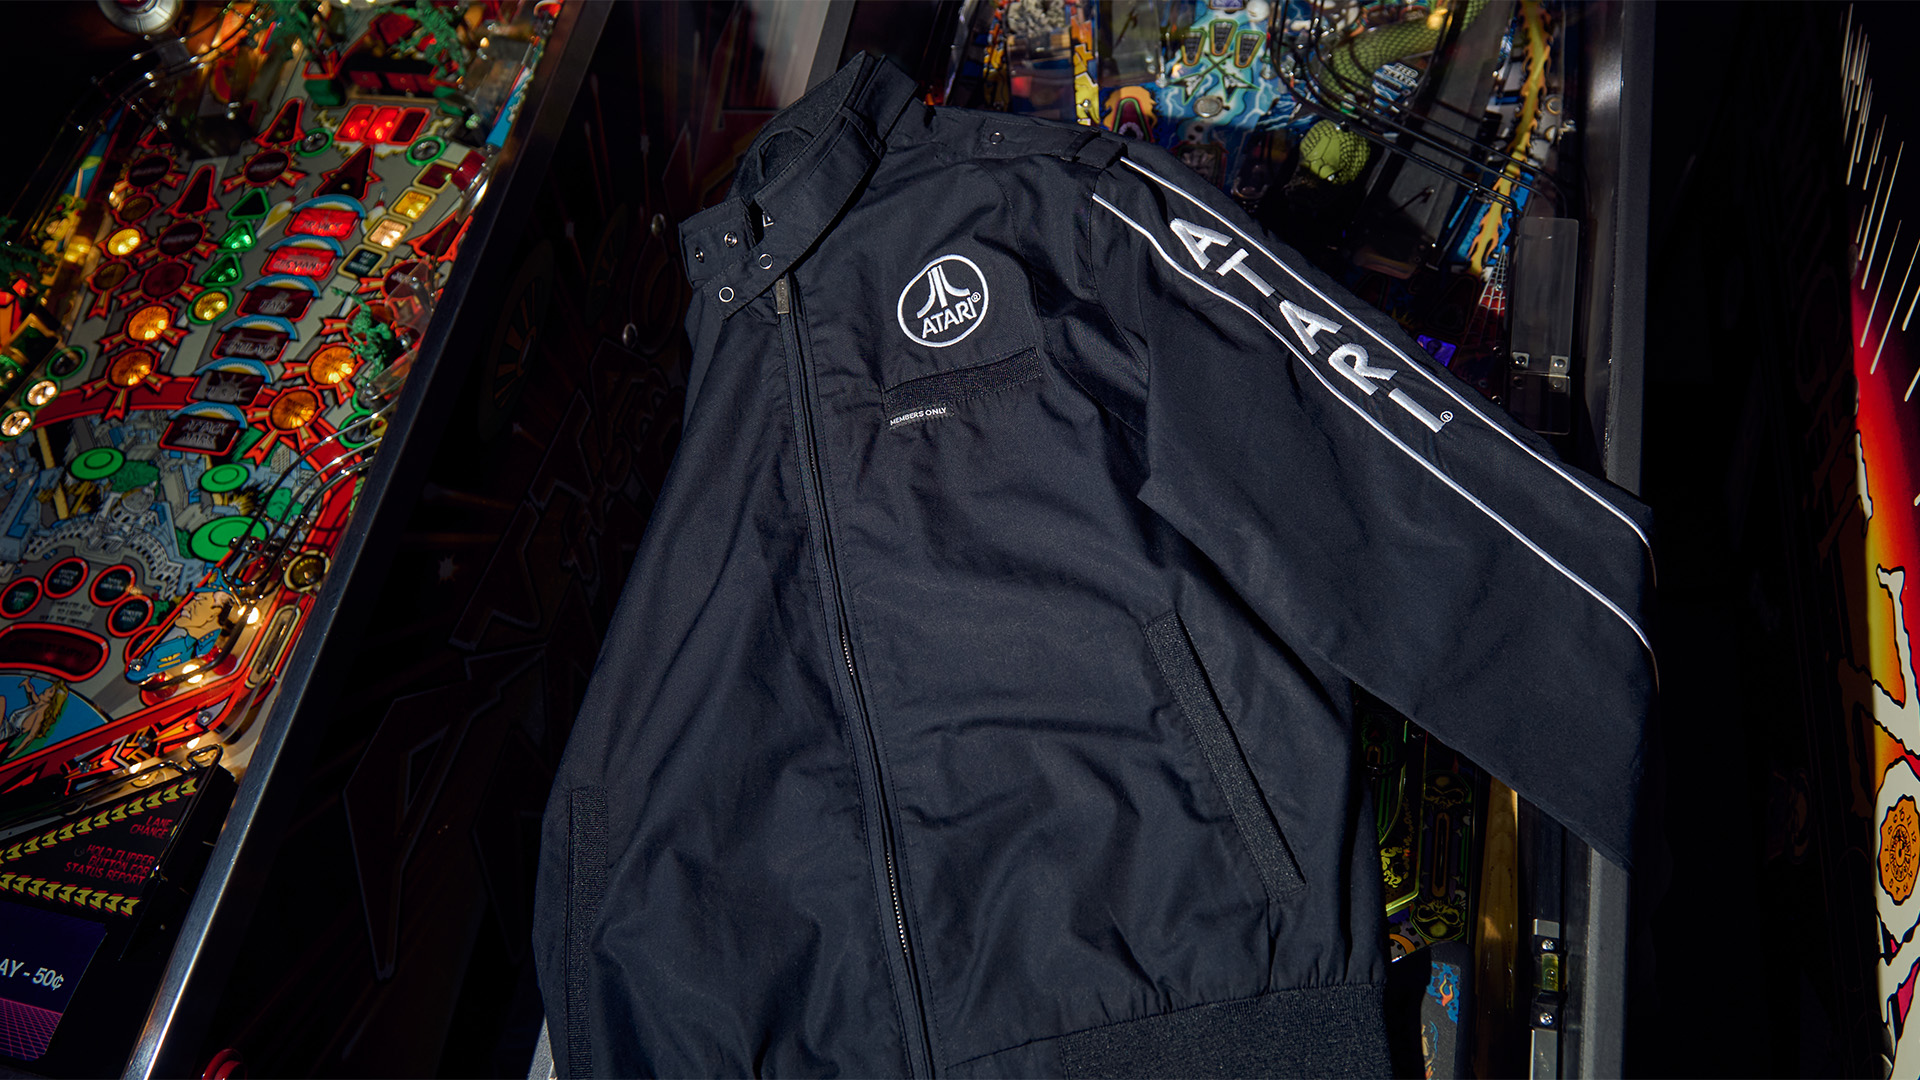 Atari and Members Only® Drop Retro-Inspired Limited-Edition Jacket Collection 